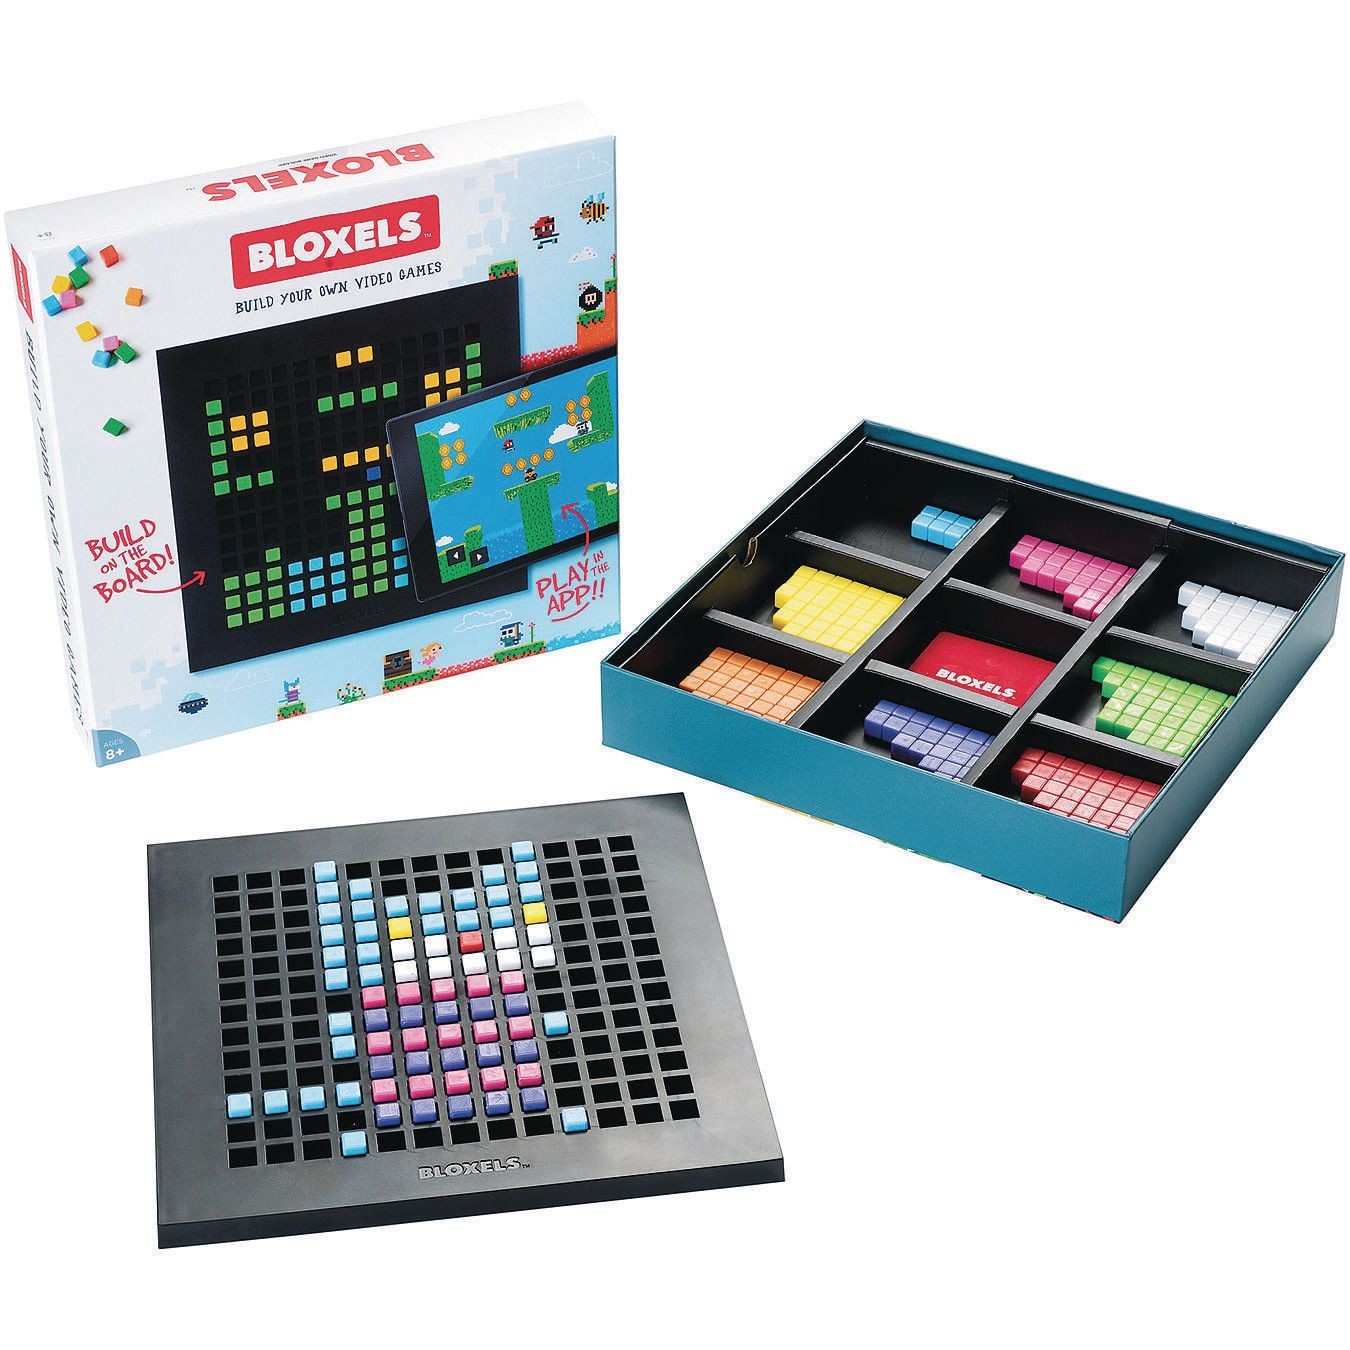 Bloxels Build Your Own Video Games: Official Kit + FREE GIFT – The Bloxels  Store